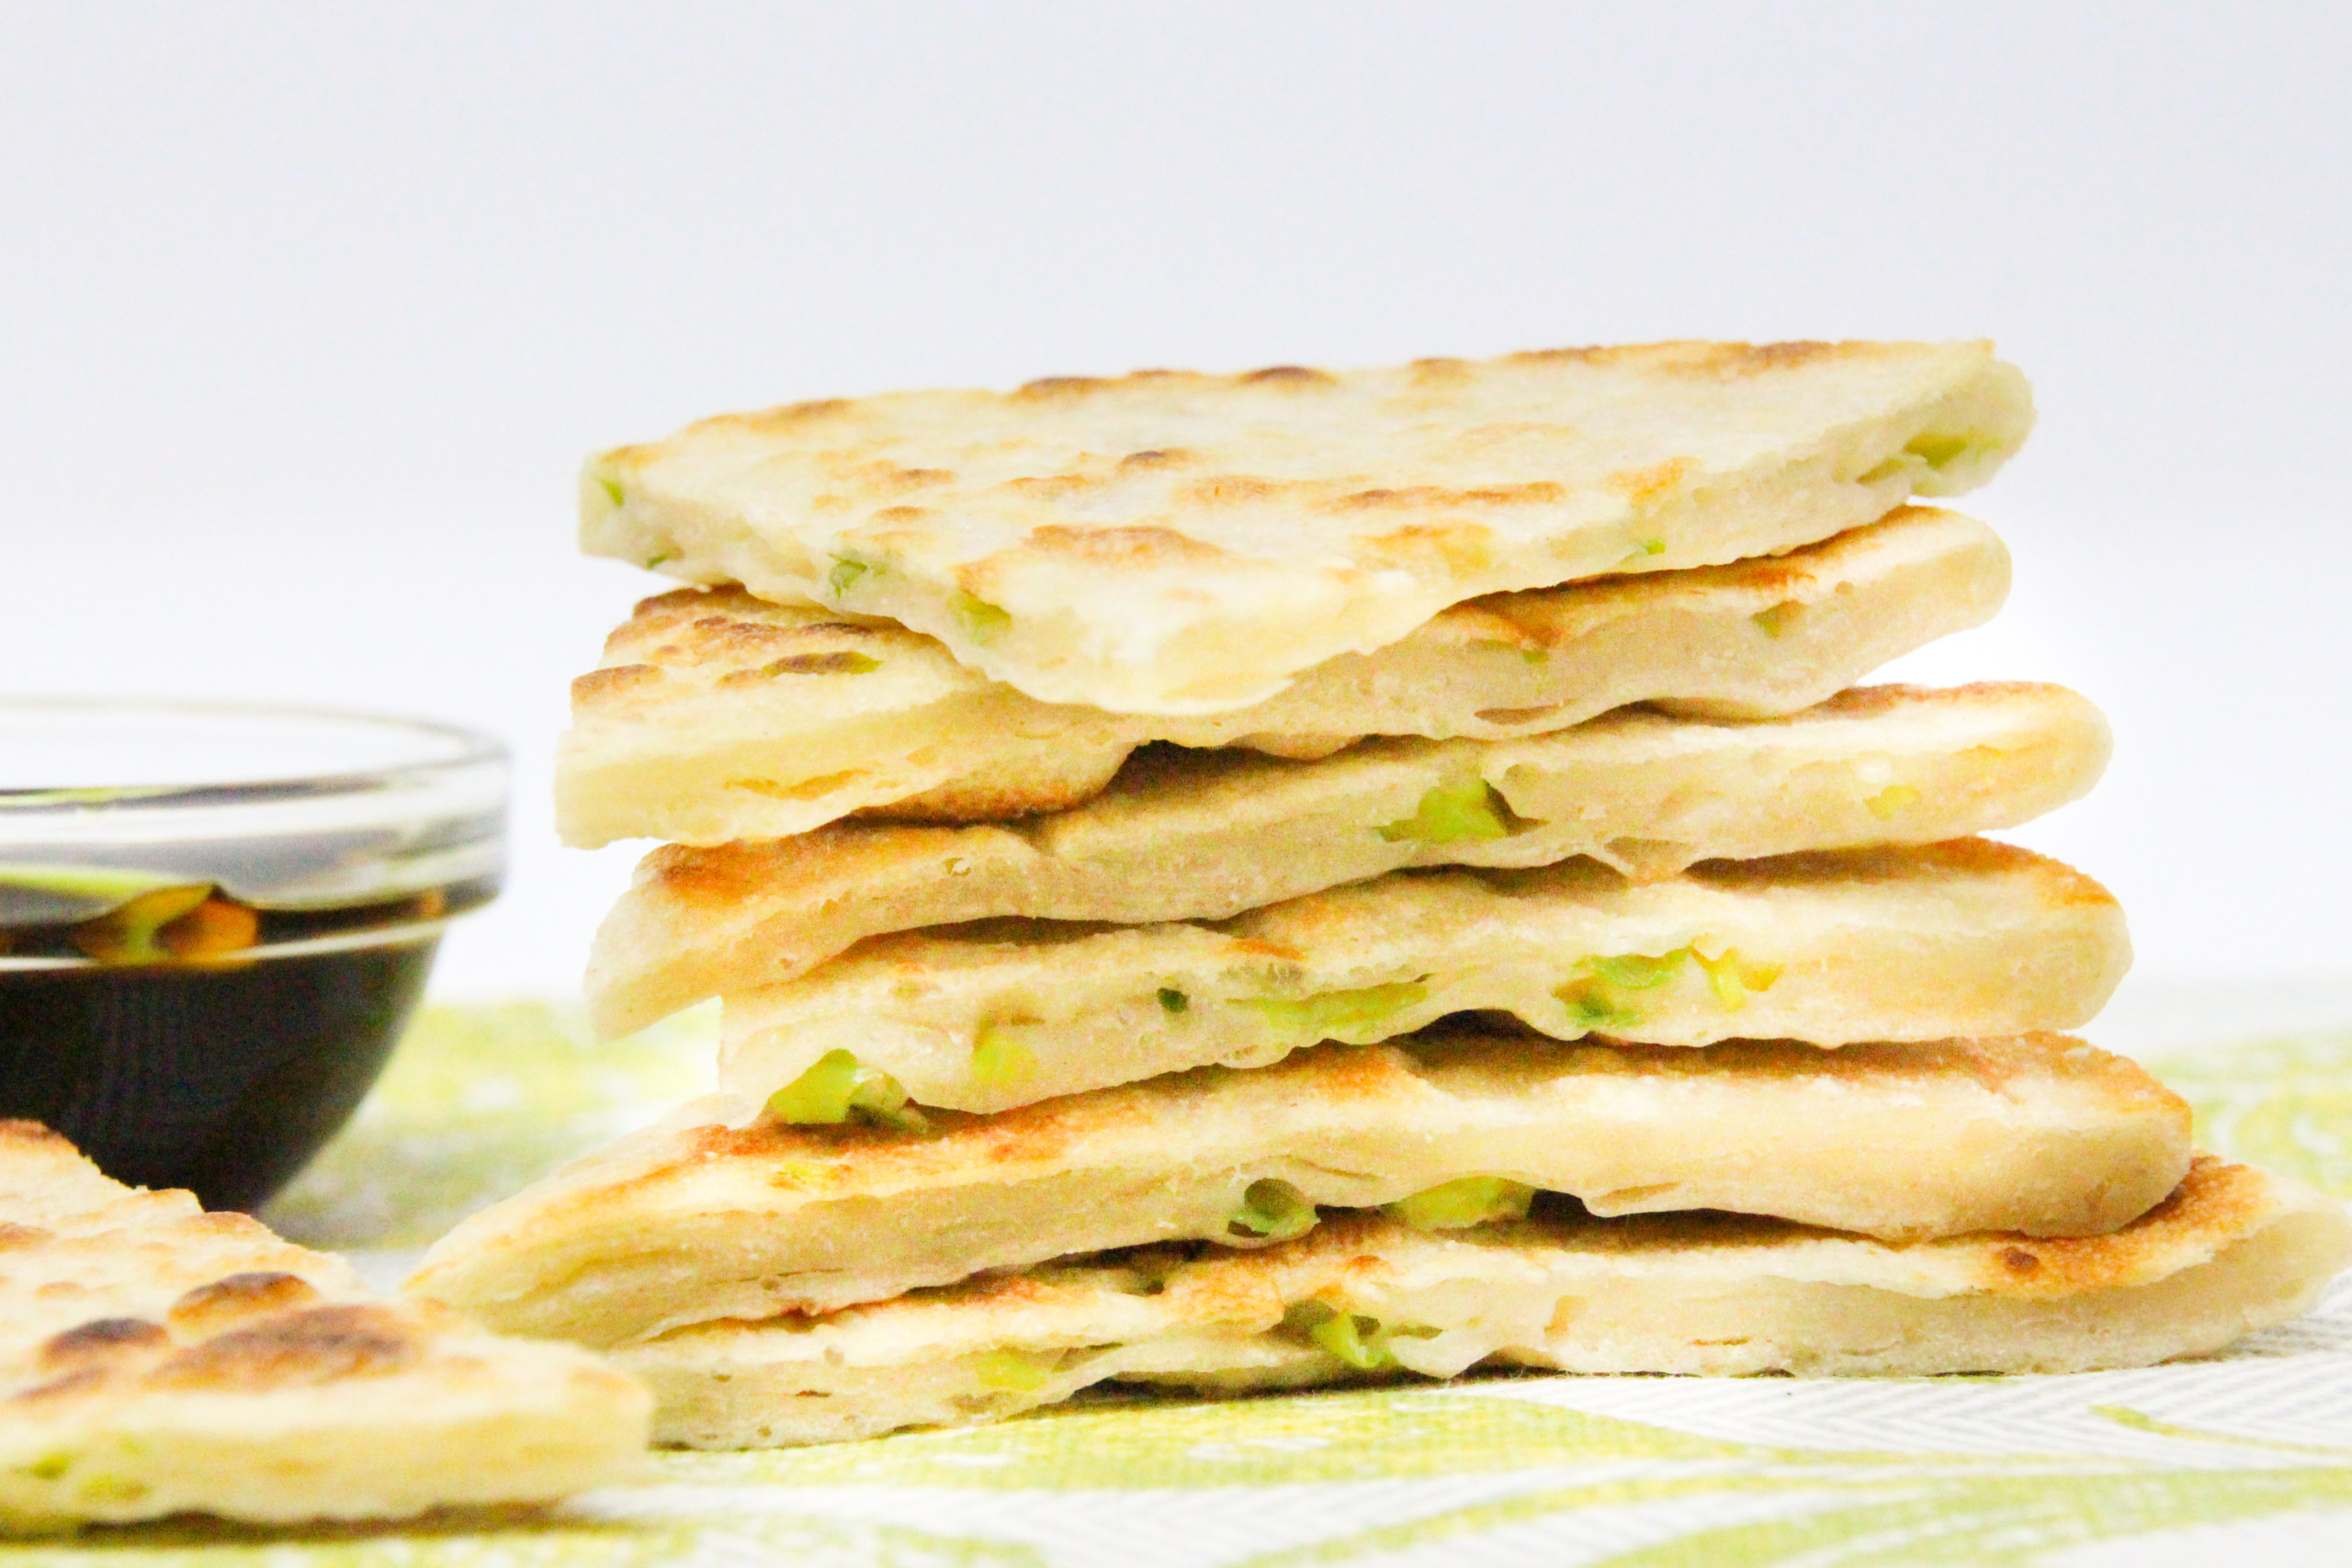 A few super simple ingredients and a hot skillet are all that's necessary to whip up delicious Scallion Pancakes. Recipe shared with permission granted by Jennifer J. Chow, author of HOT POT MURDER. 